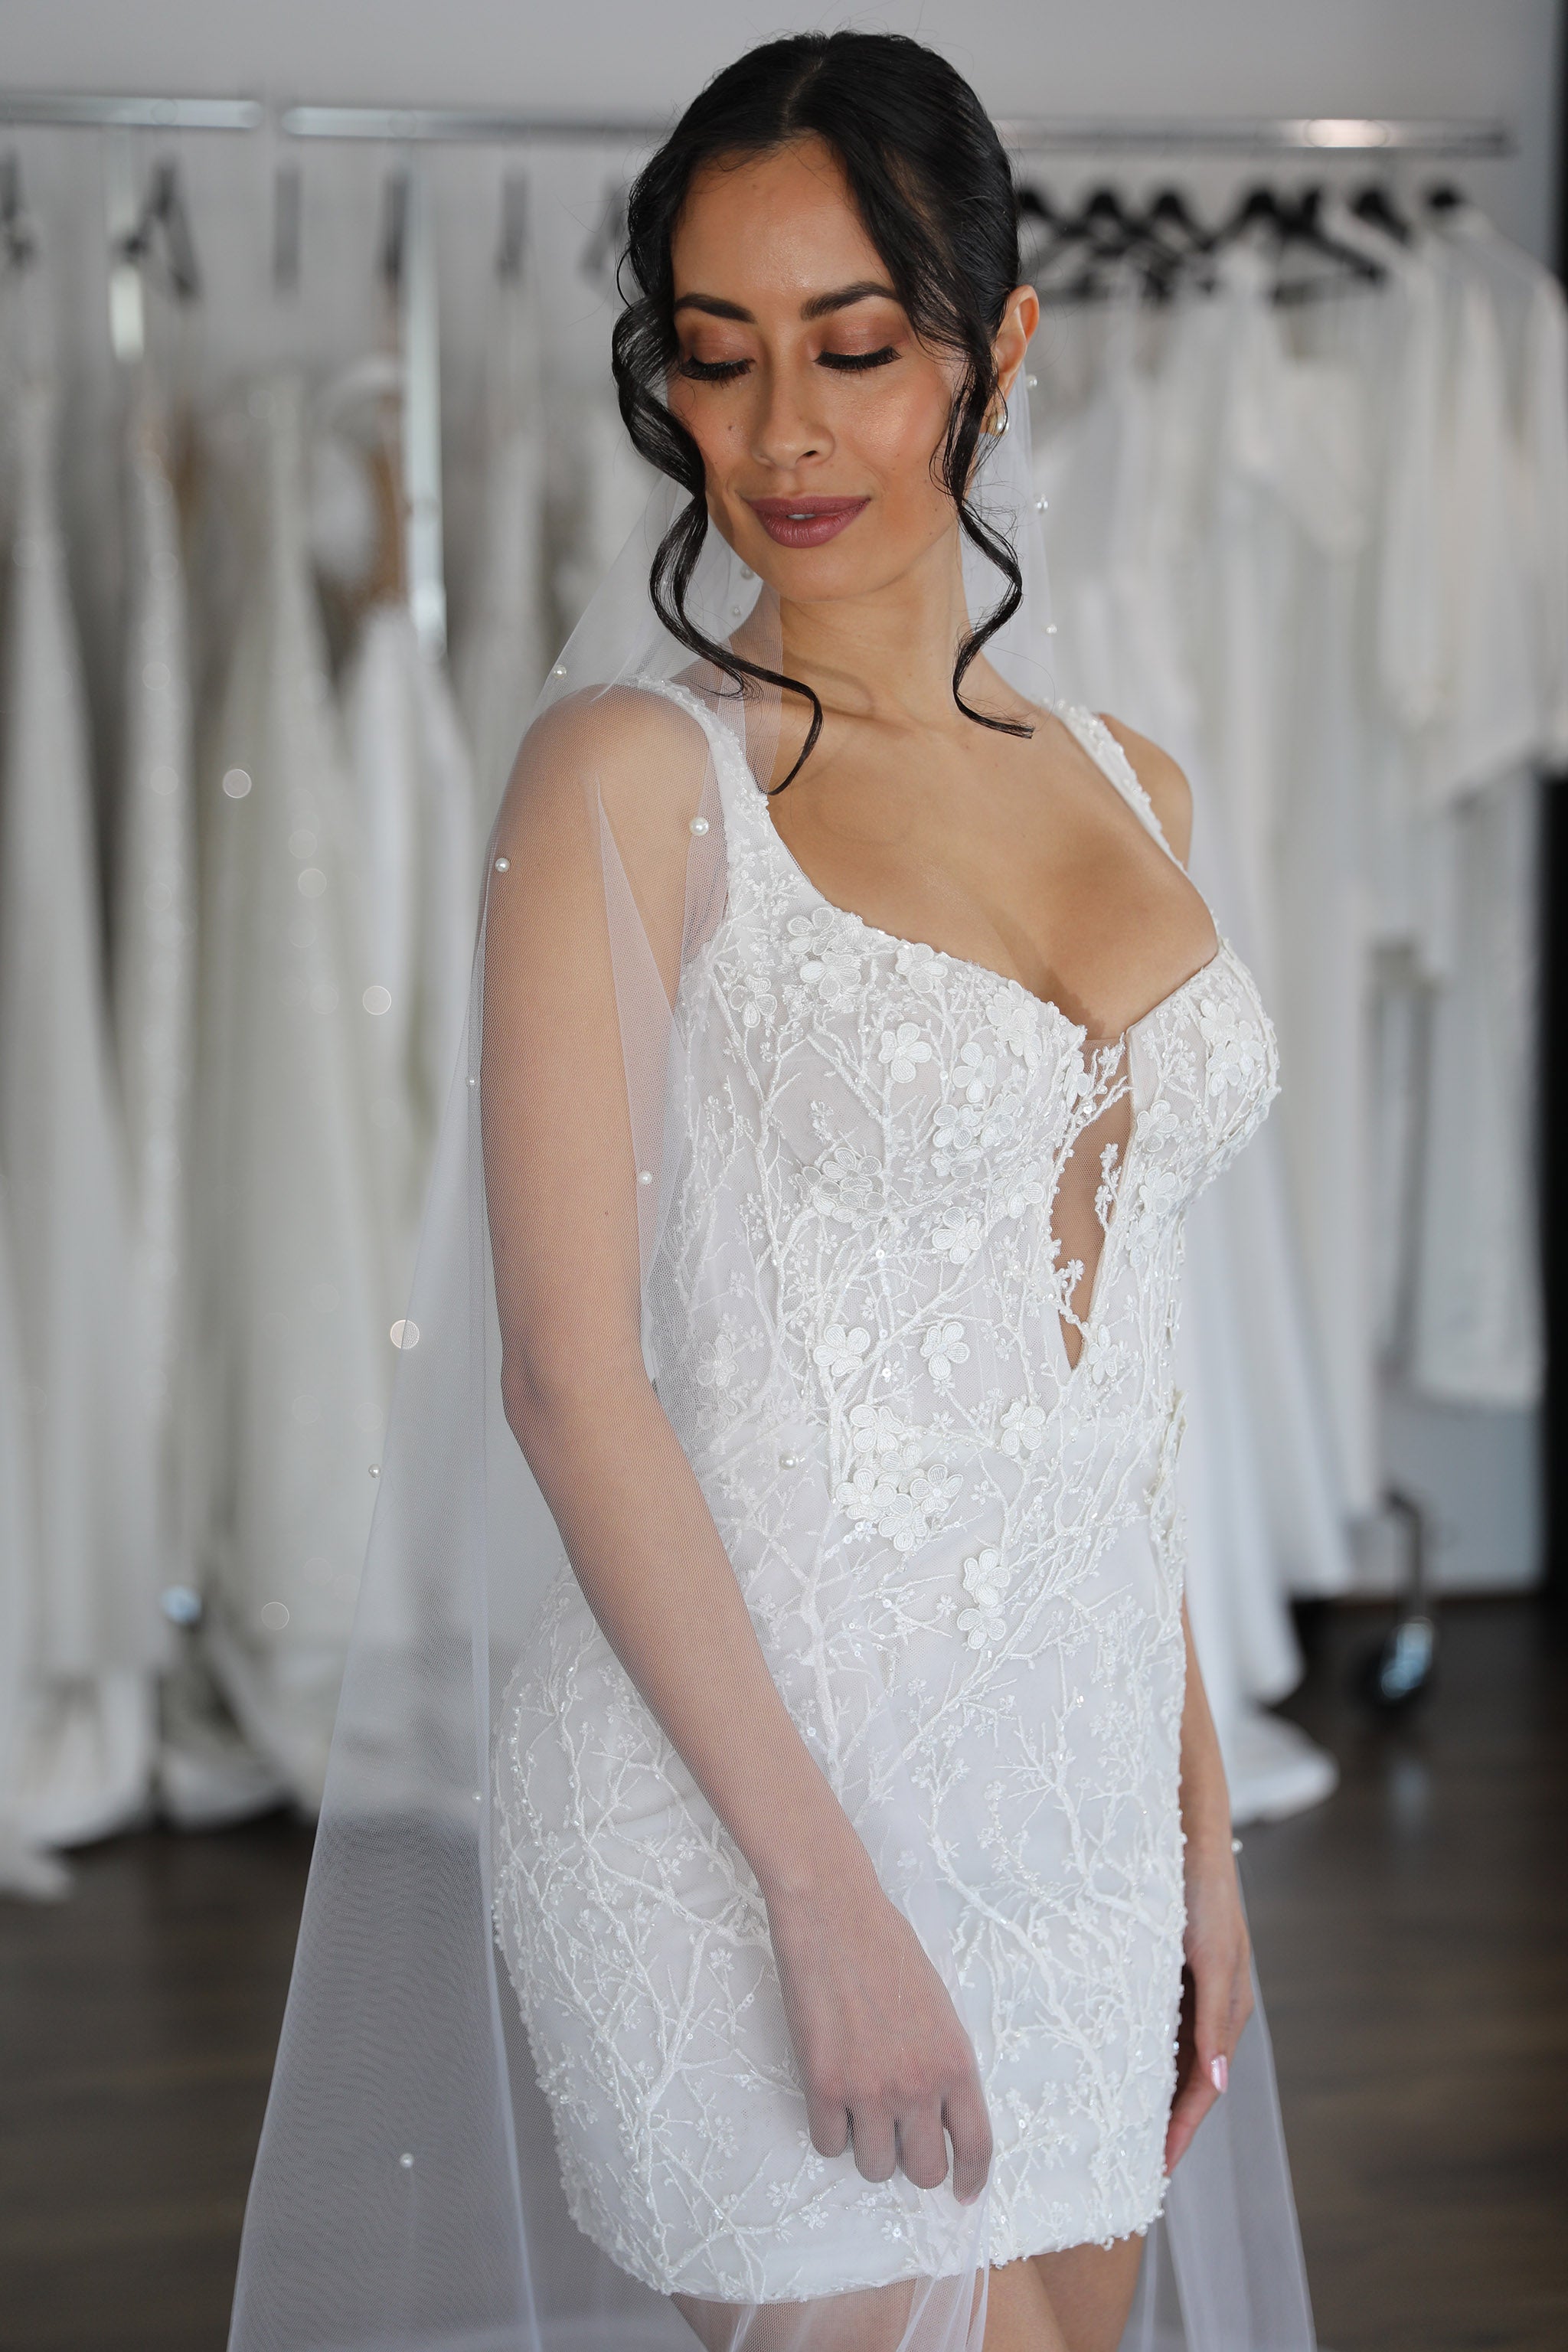 pearl veil and floral lace mini dress on bride